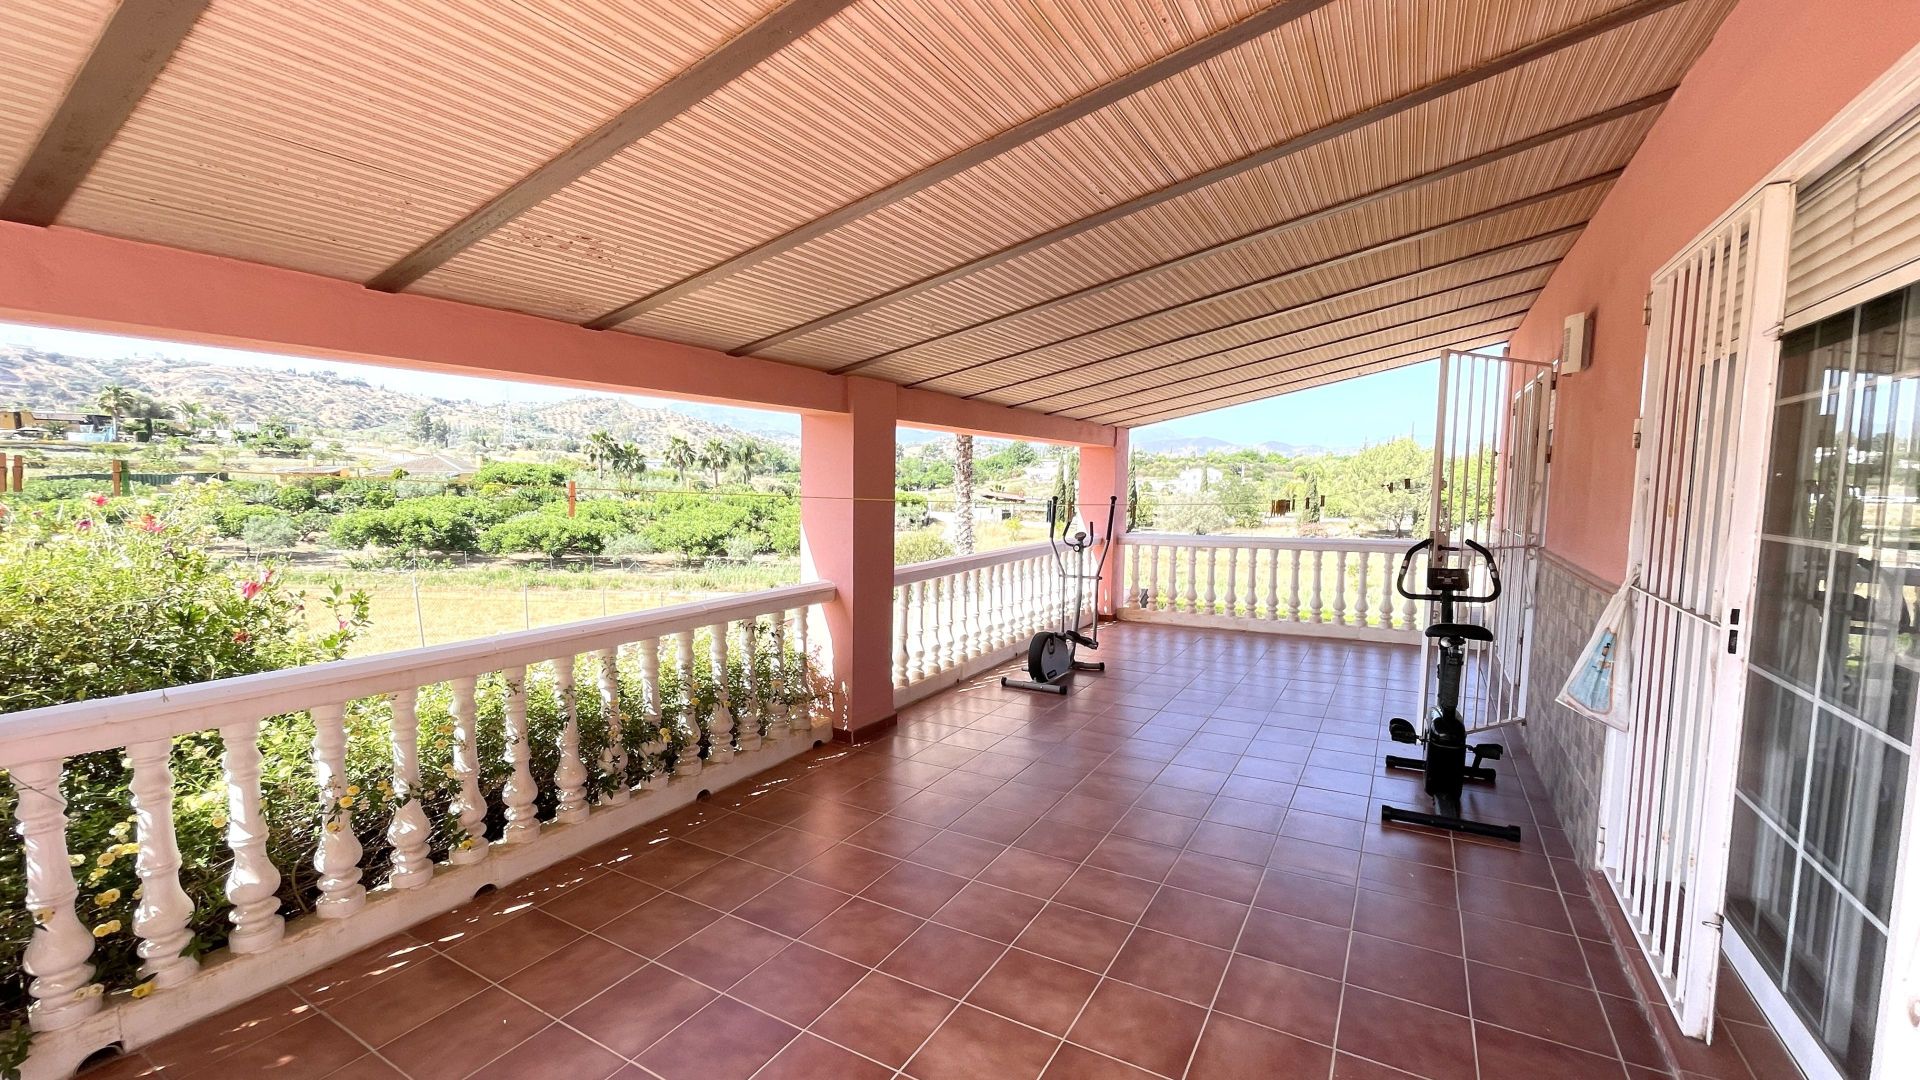 Countryhome for sale in Málaga 17